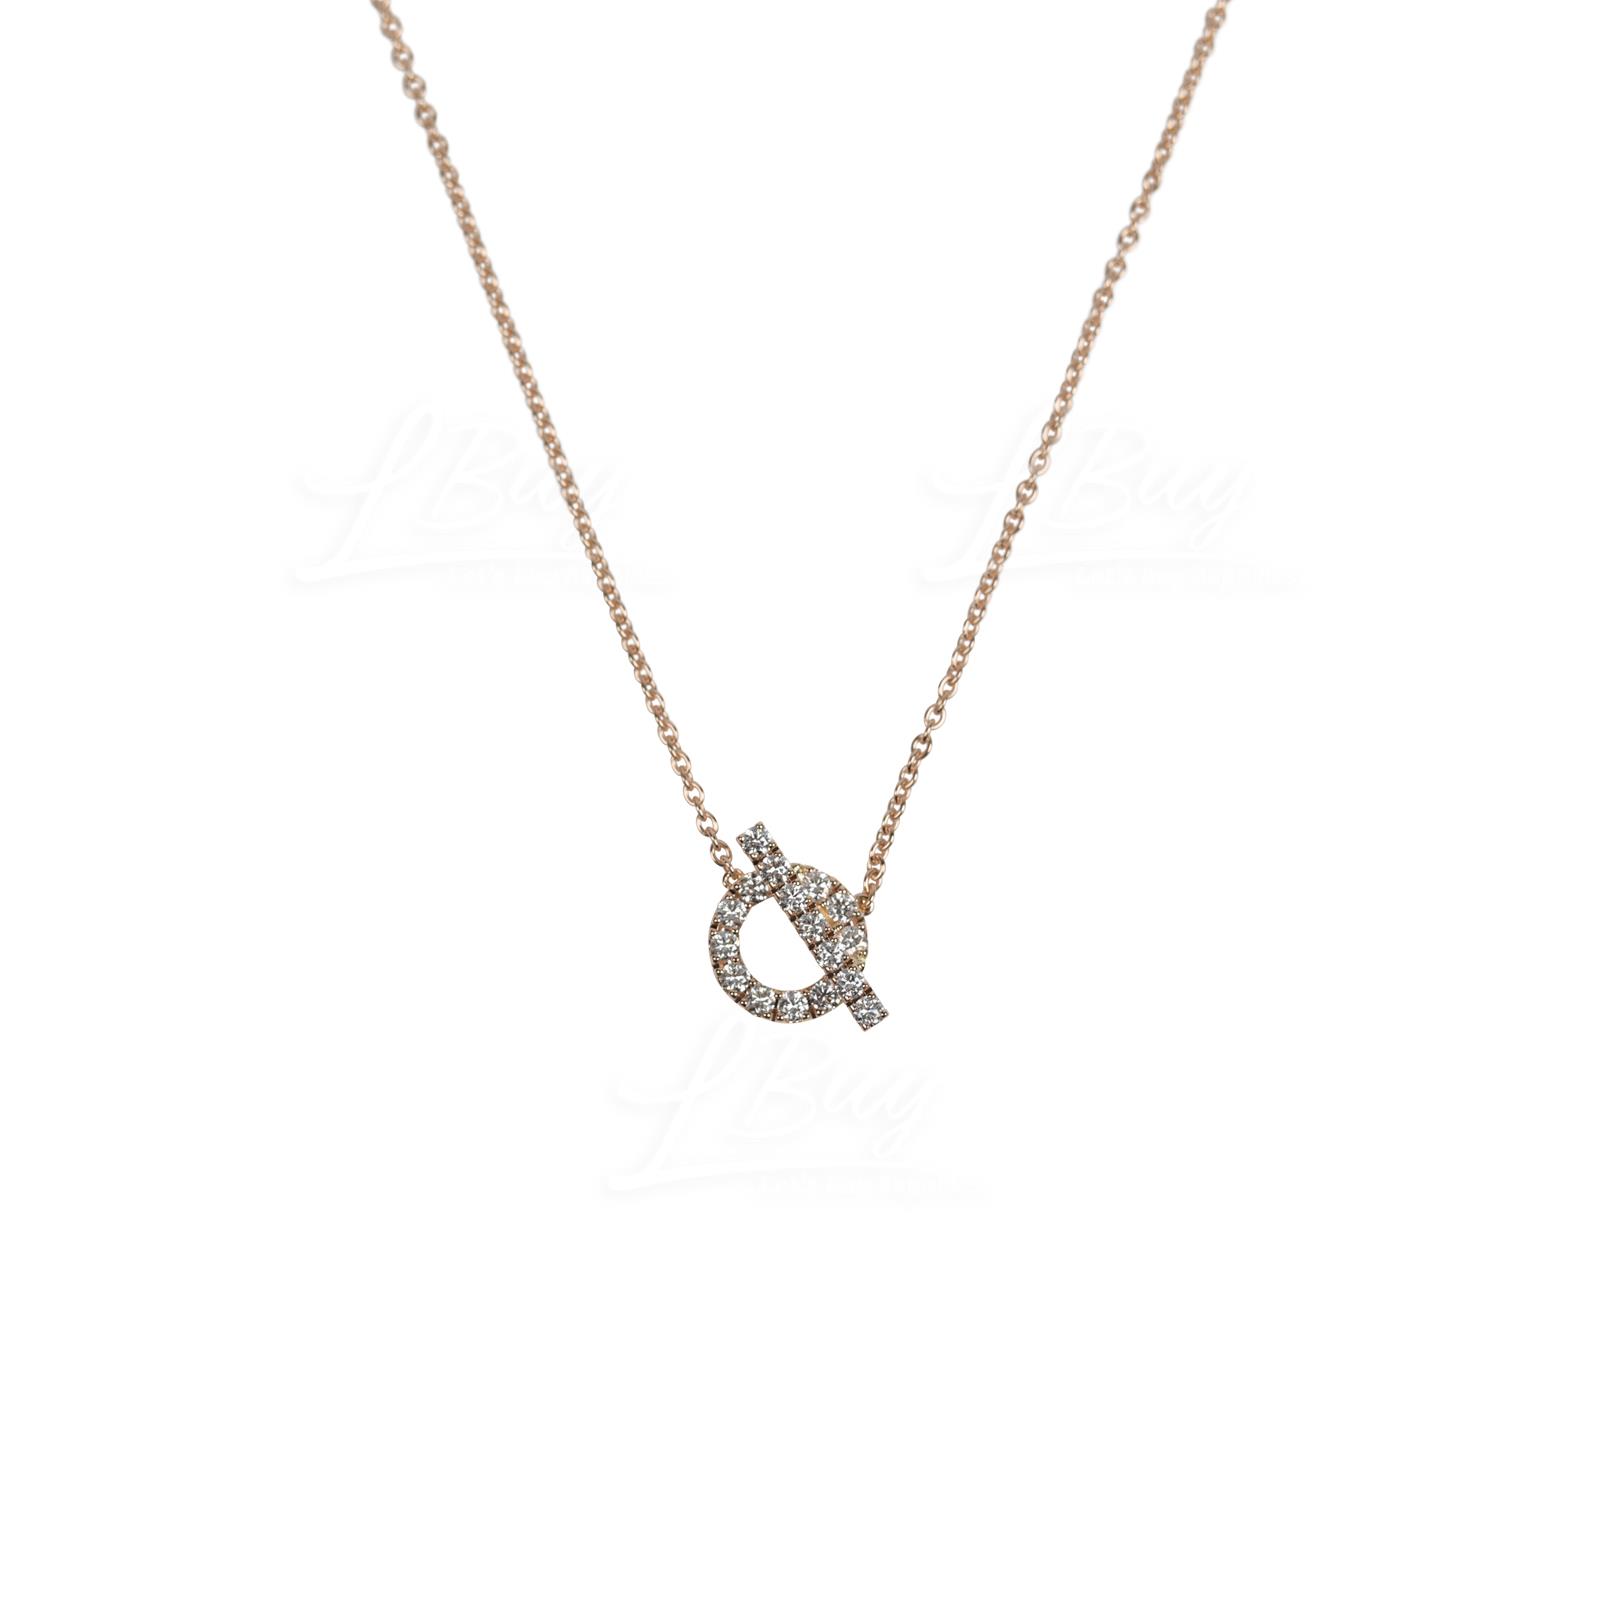 Hermes Finesse Pendant 18K 750, 1000 in Rose Gold set with 17 Diamonds (0.46 ct)